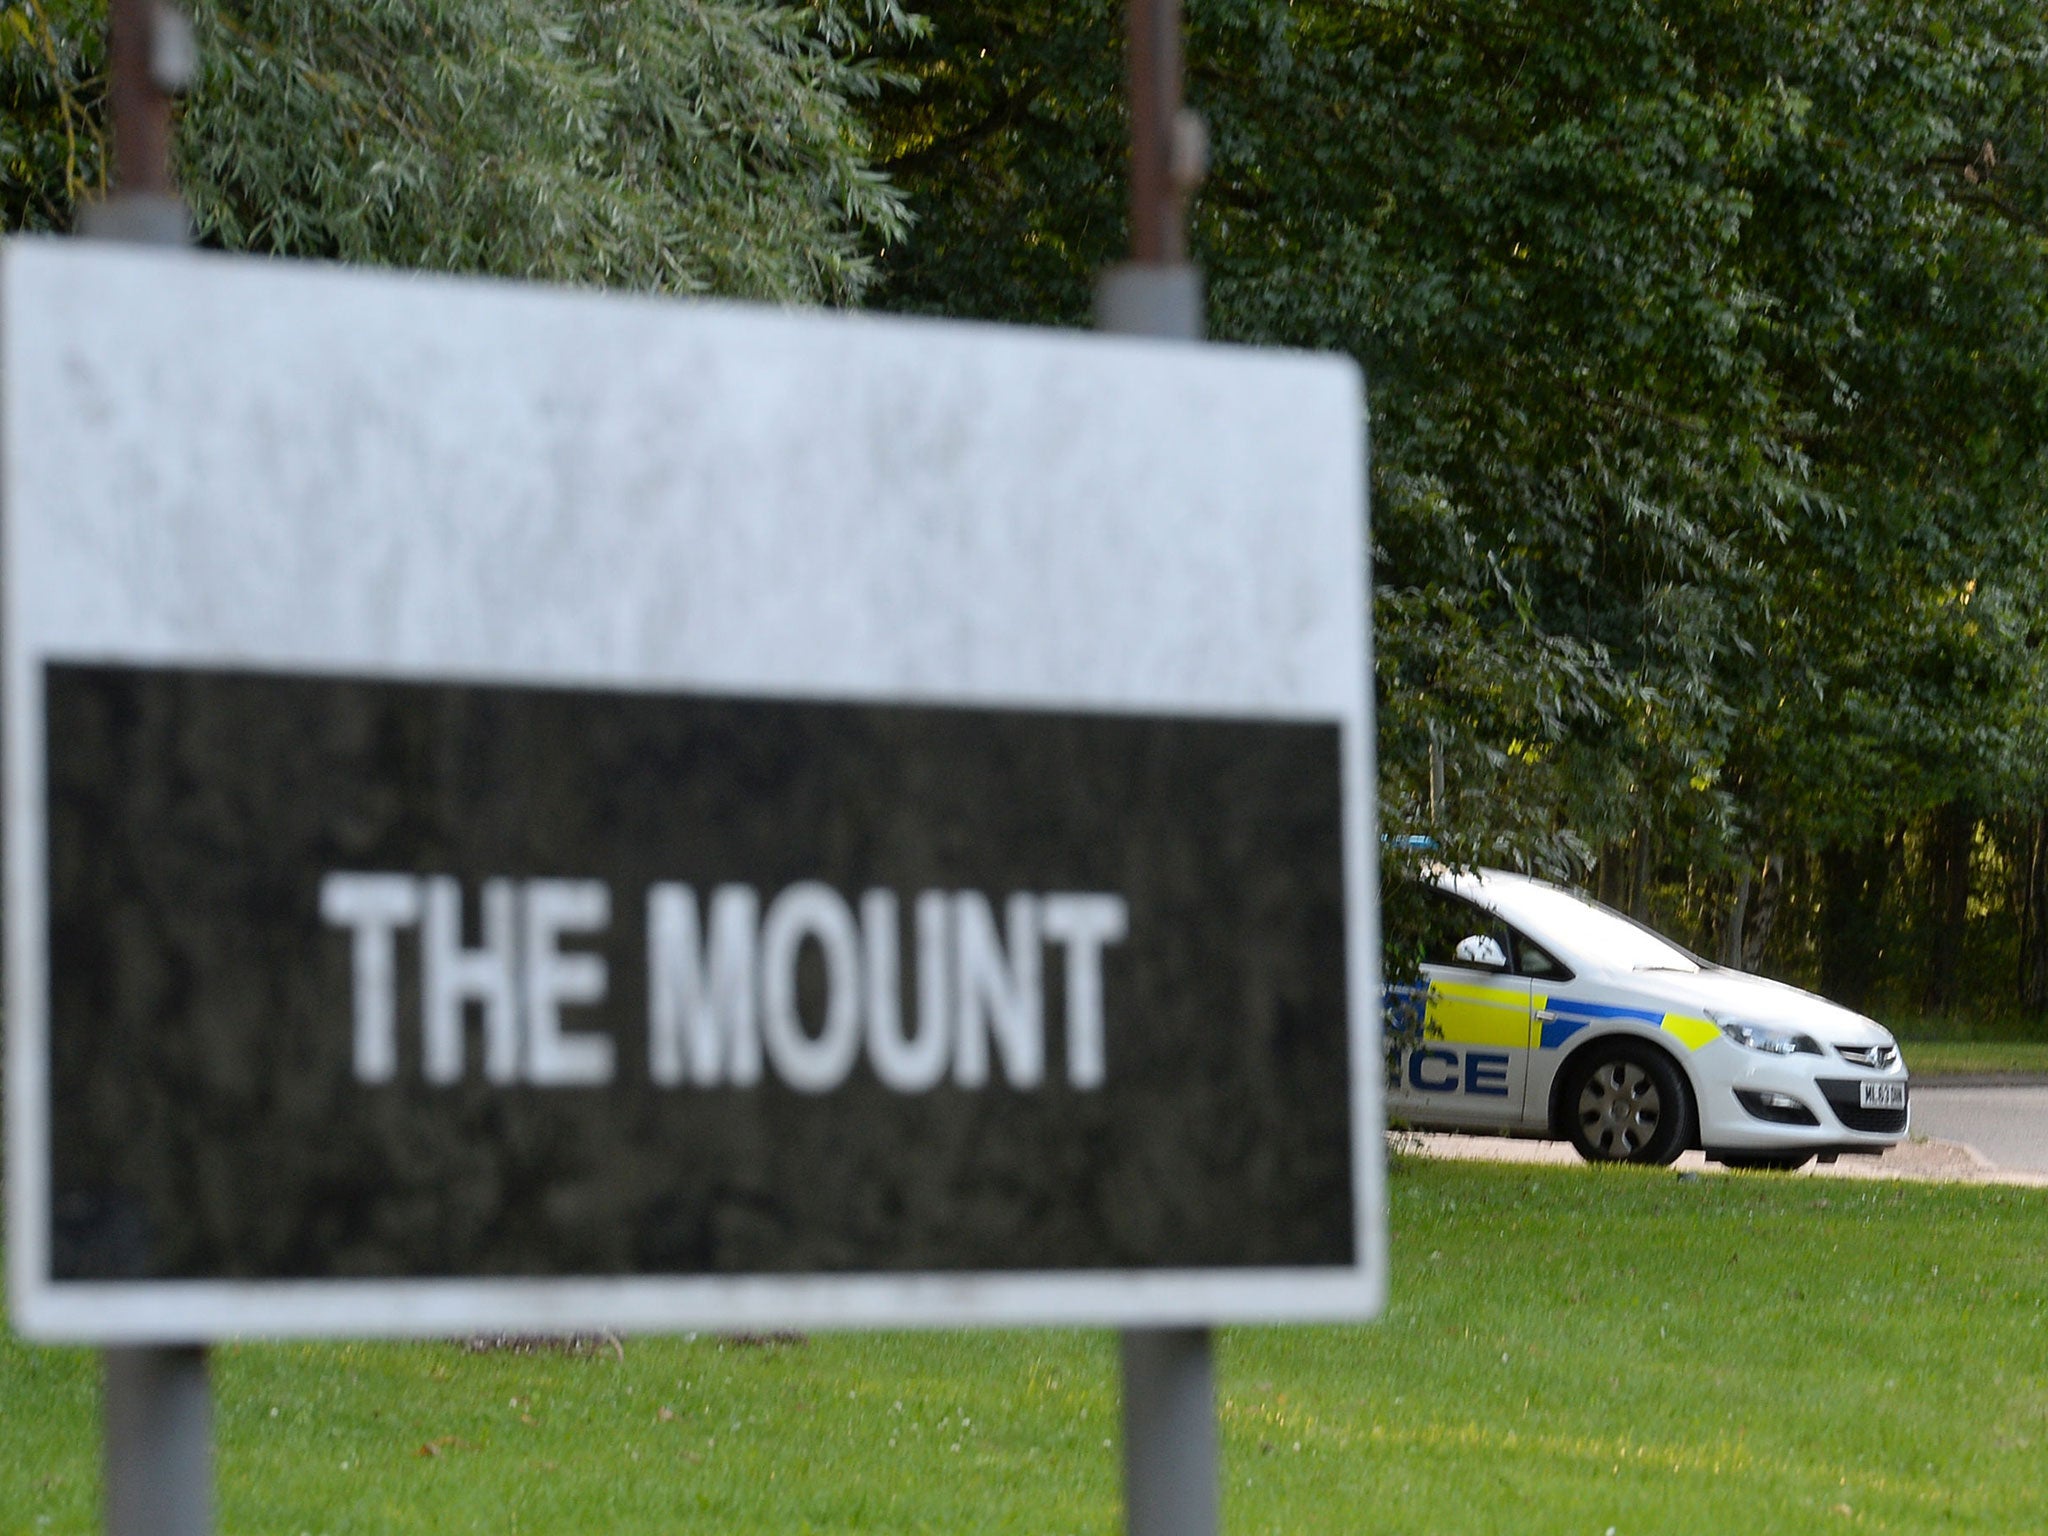 Police vehicles at The Mount Prison, in Hemel Hempstead, Hertfordshire, on 31 July